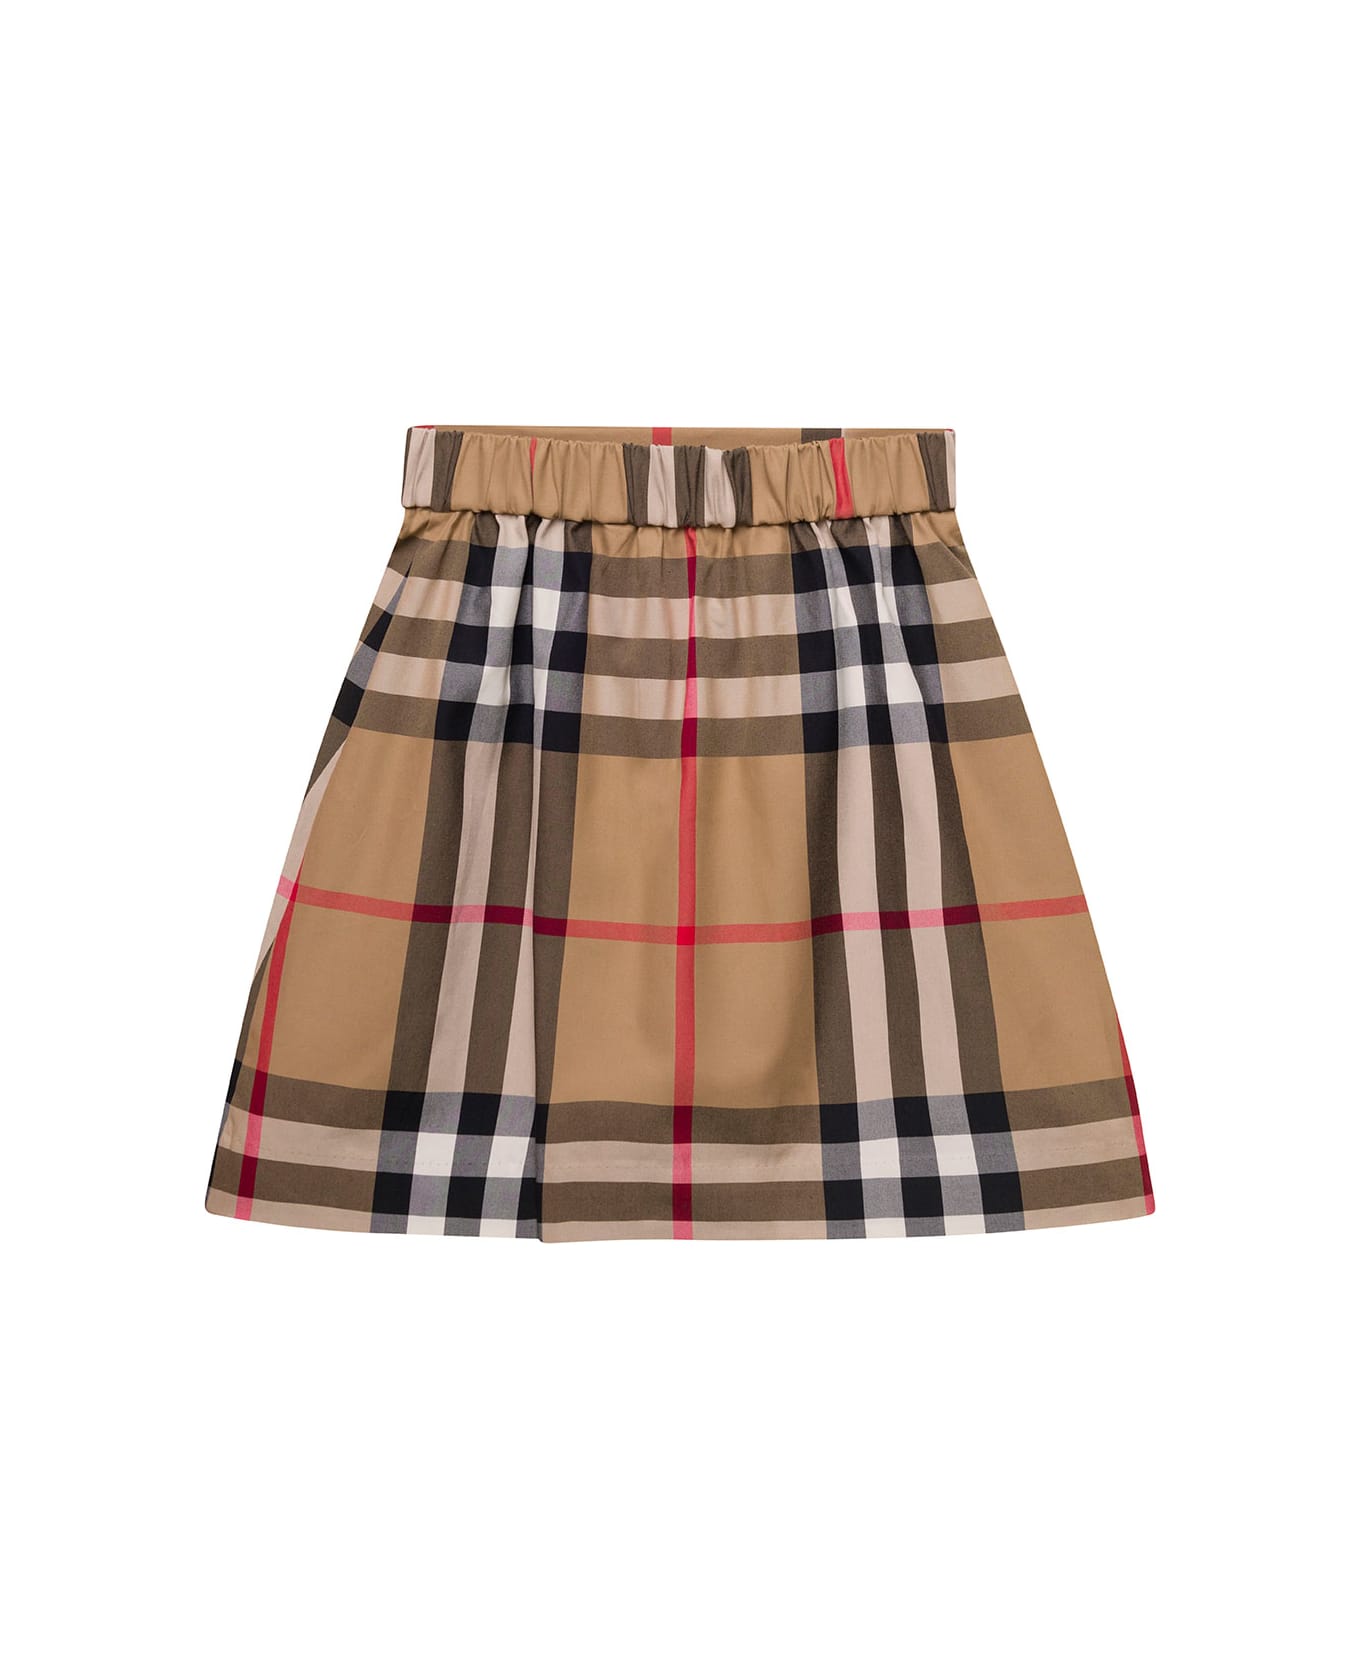 Burberry 'anjelica' Beige Mini Skirt With Vintage Check Motif In Cotton Girl - Archive beige ip chk